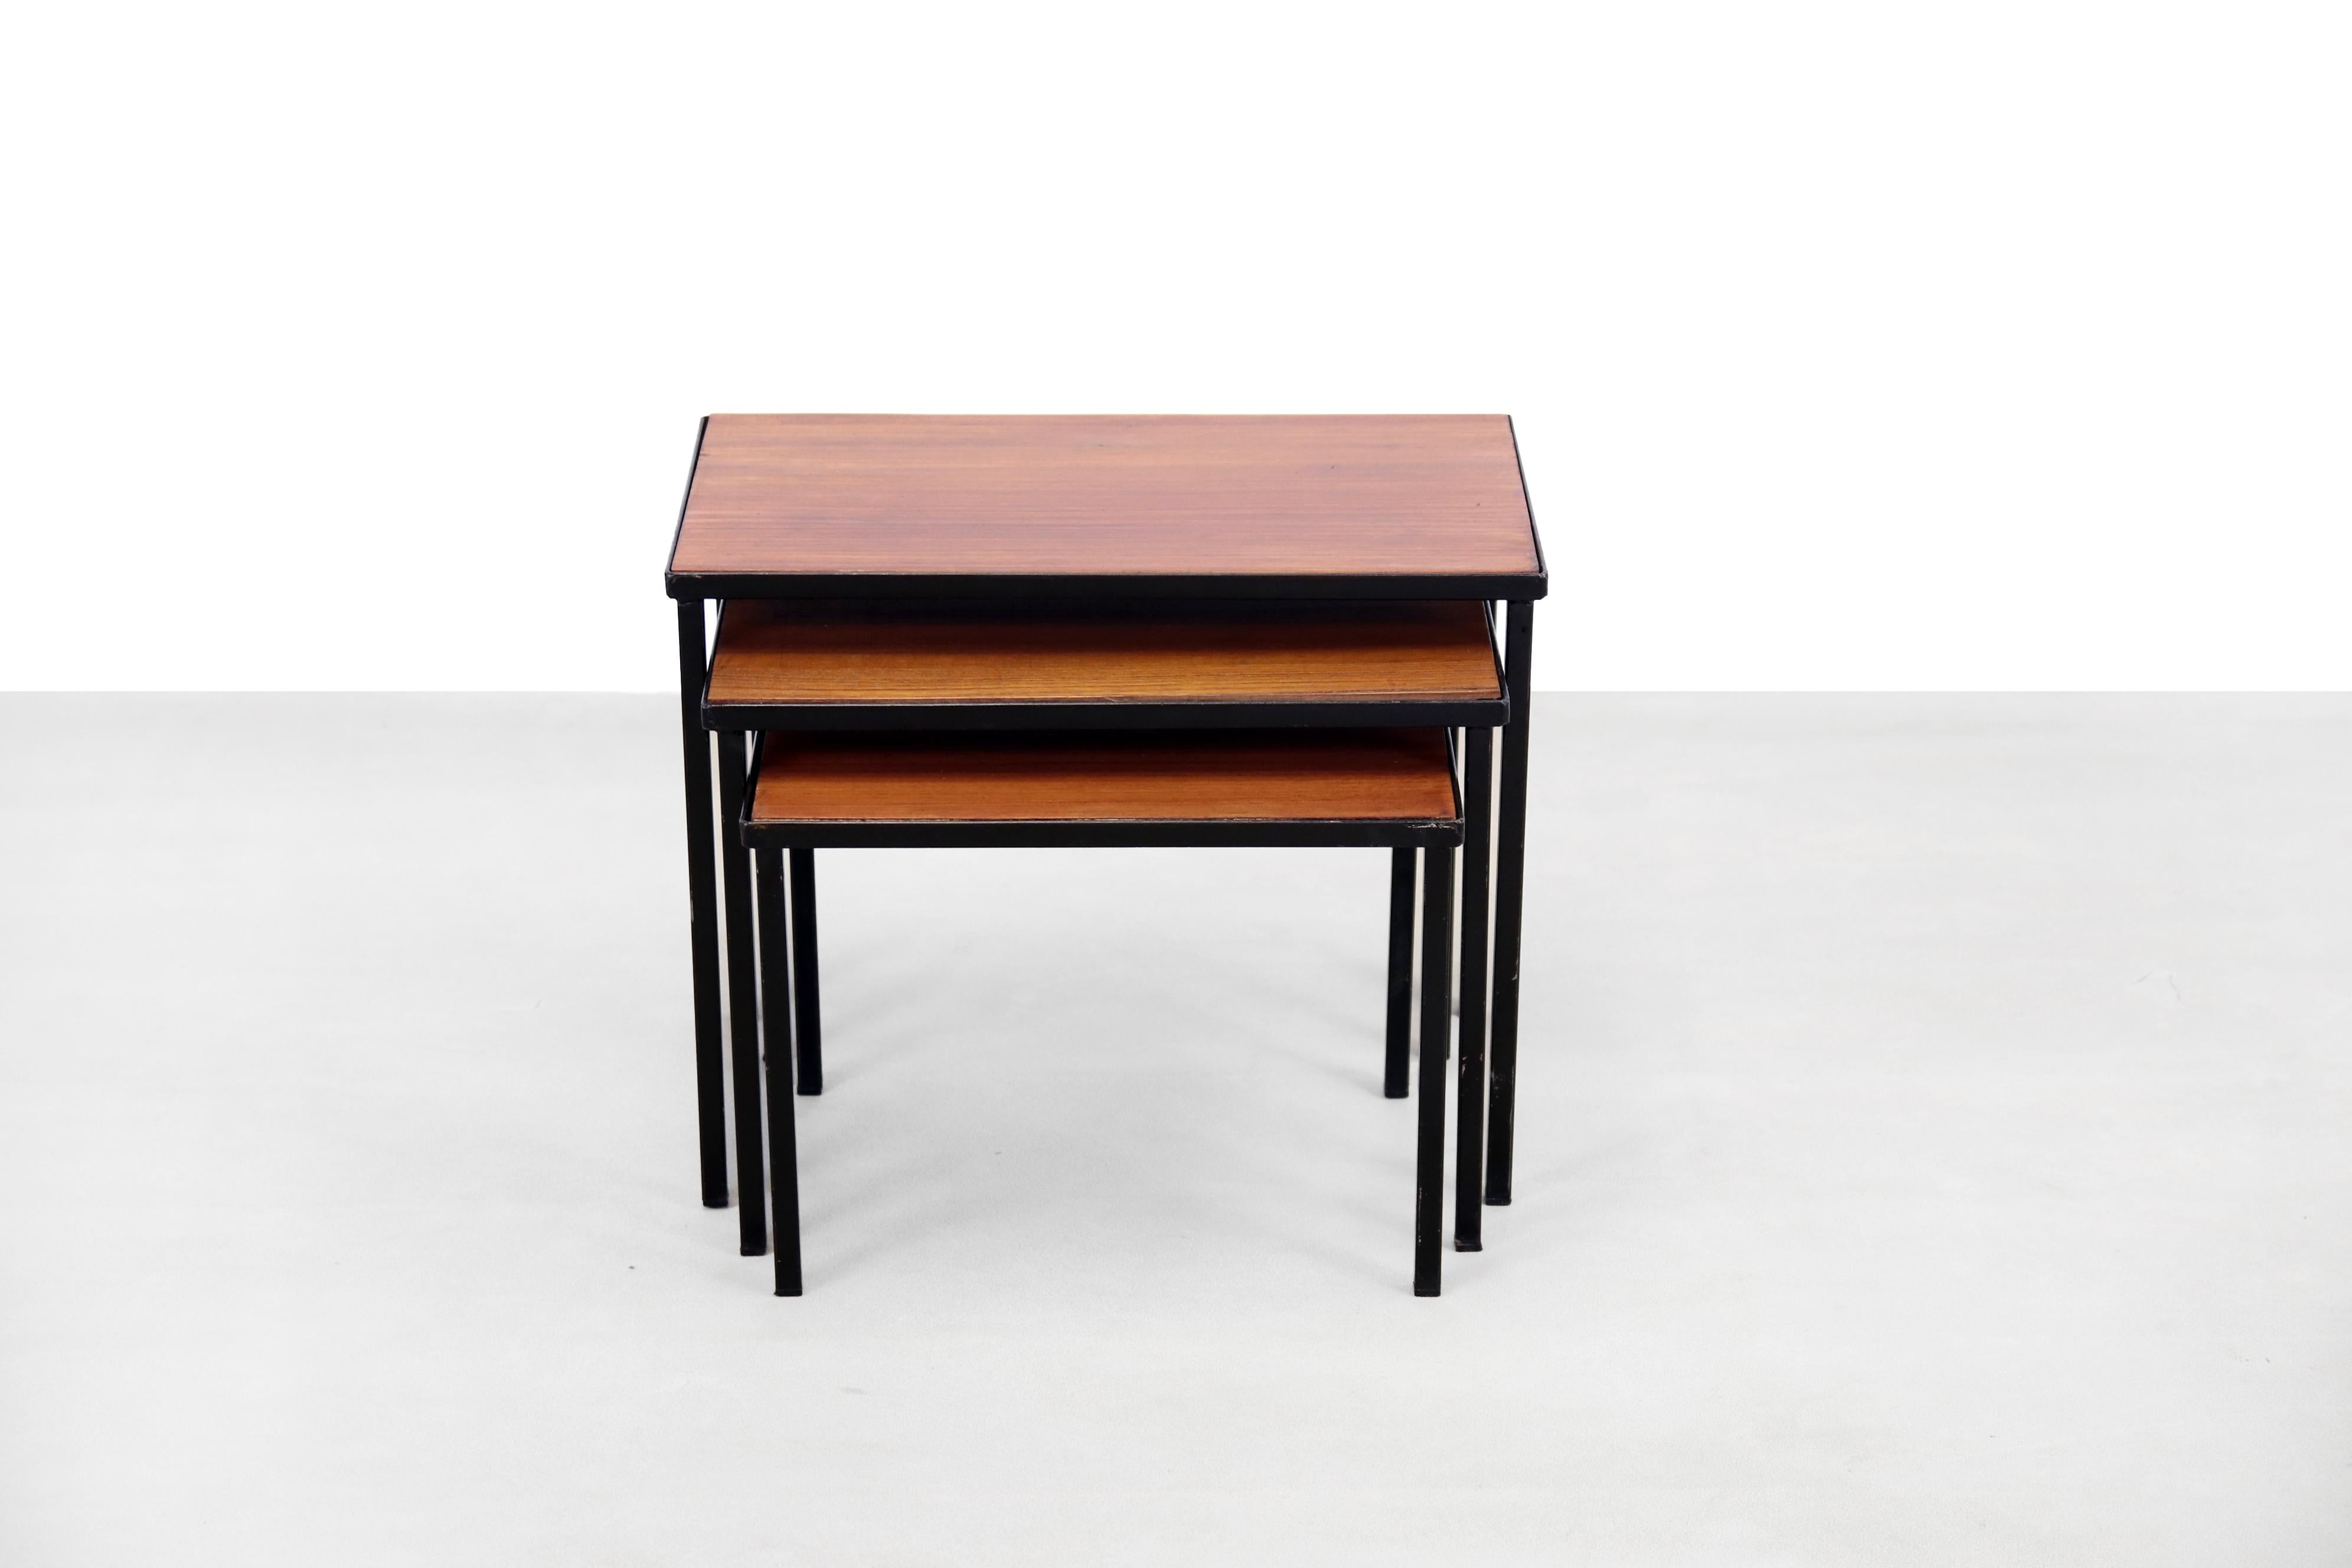 Beautiful slender set of three side tables with black metal frame with teak table tops. This set is from the Dutch manufacturer Artimeta. These minimalistic nesting tables are multifunctional and fit perfectly in a modern day interior as well.